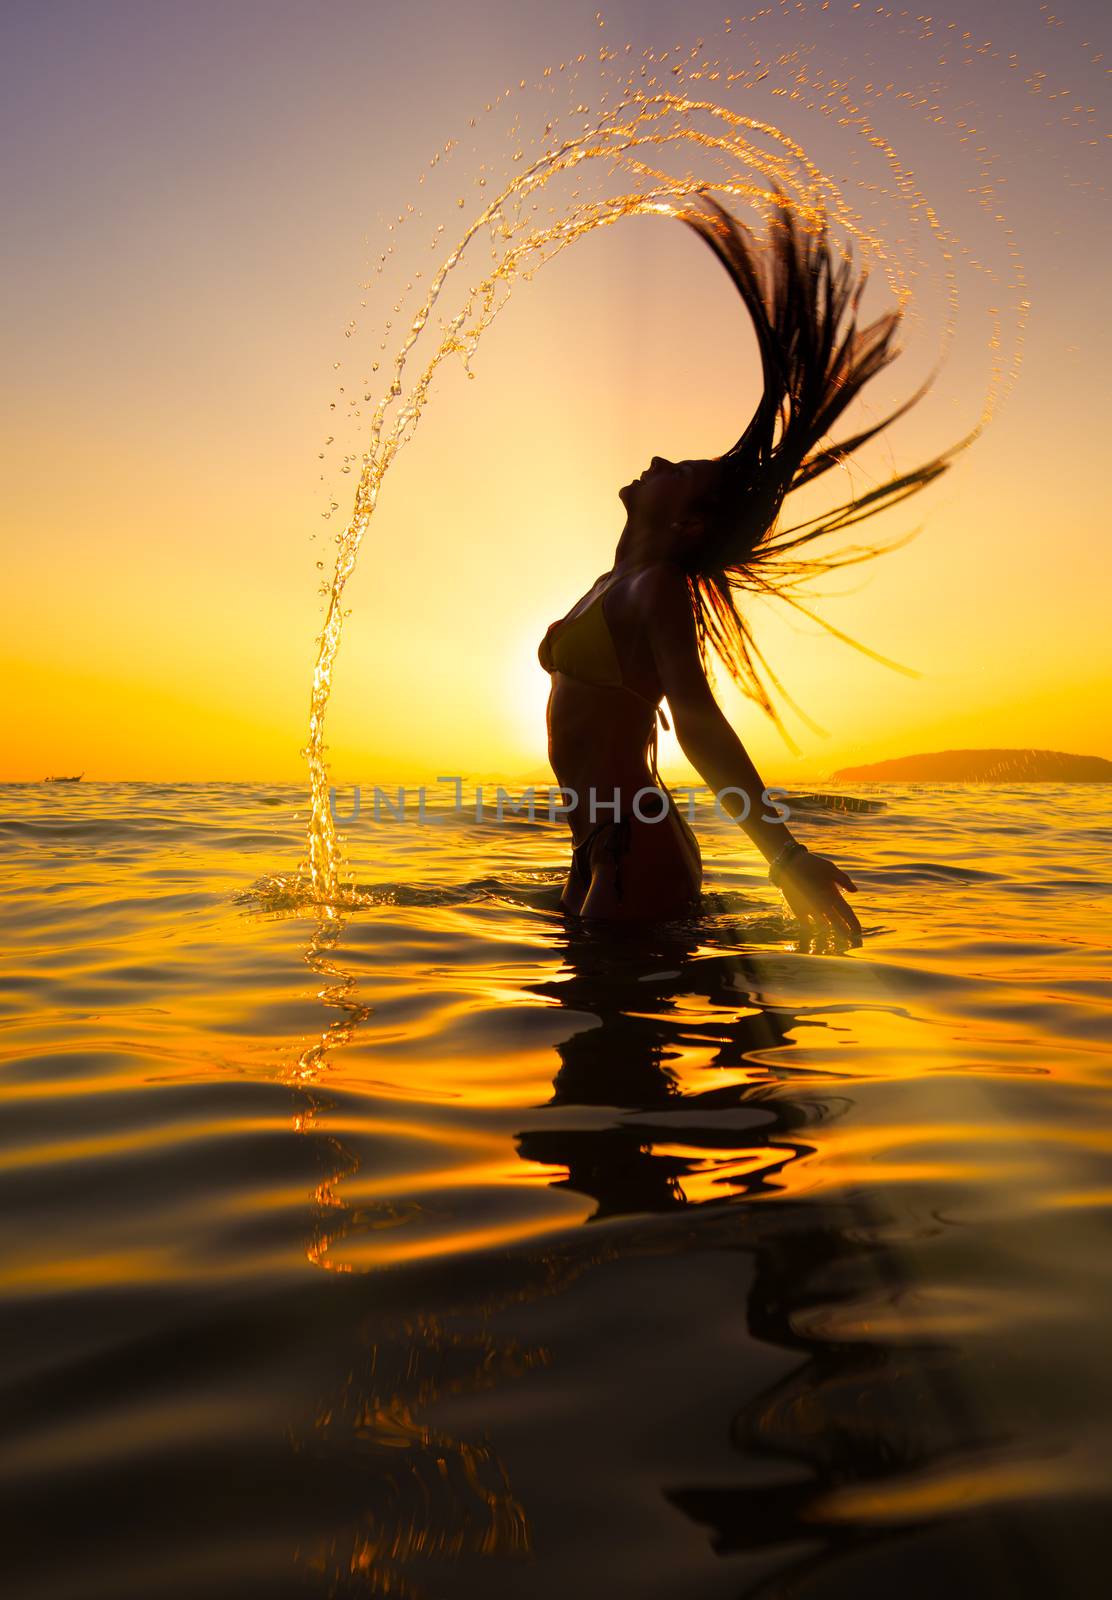 Woman in the sea at sunset flipping her hair out of the water